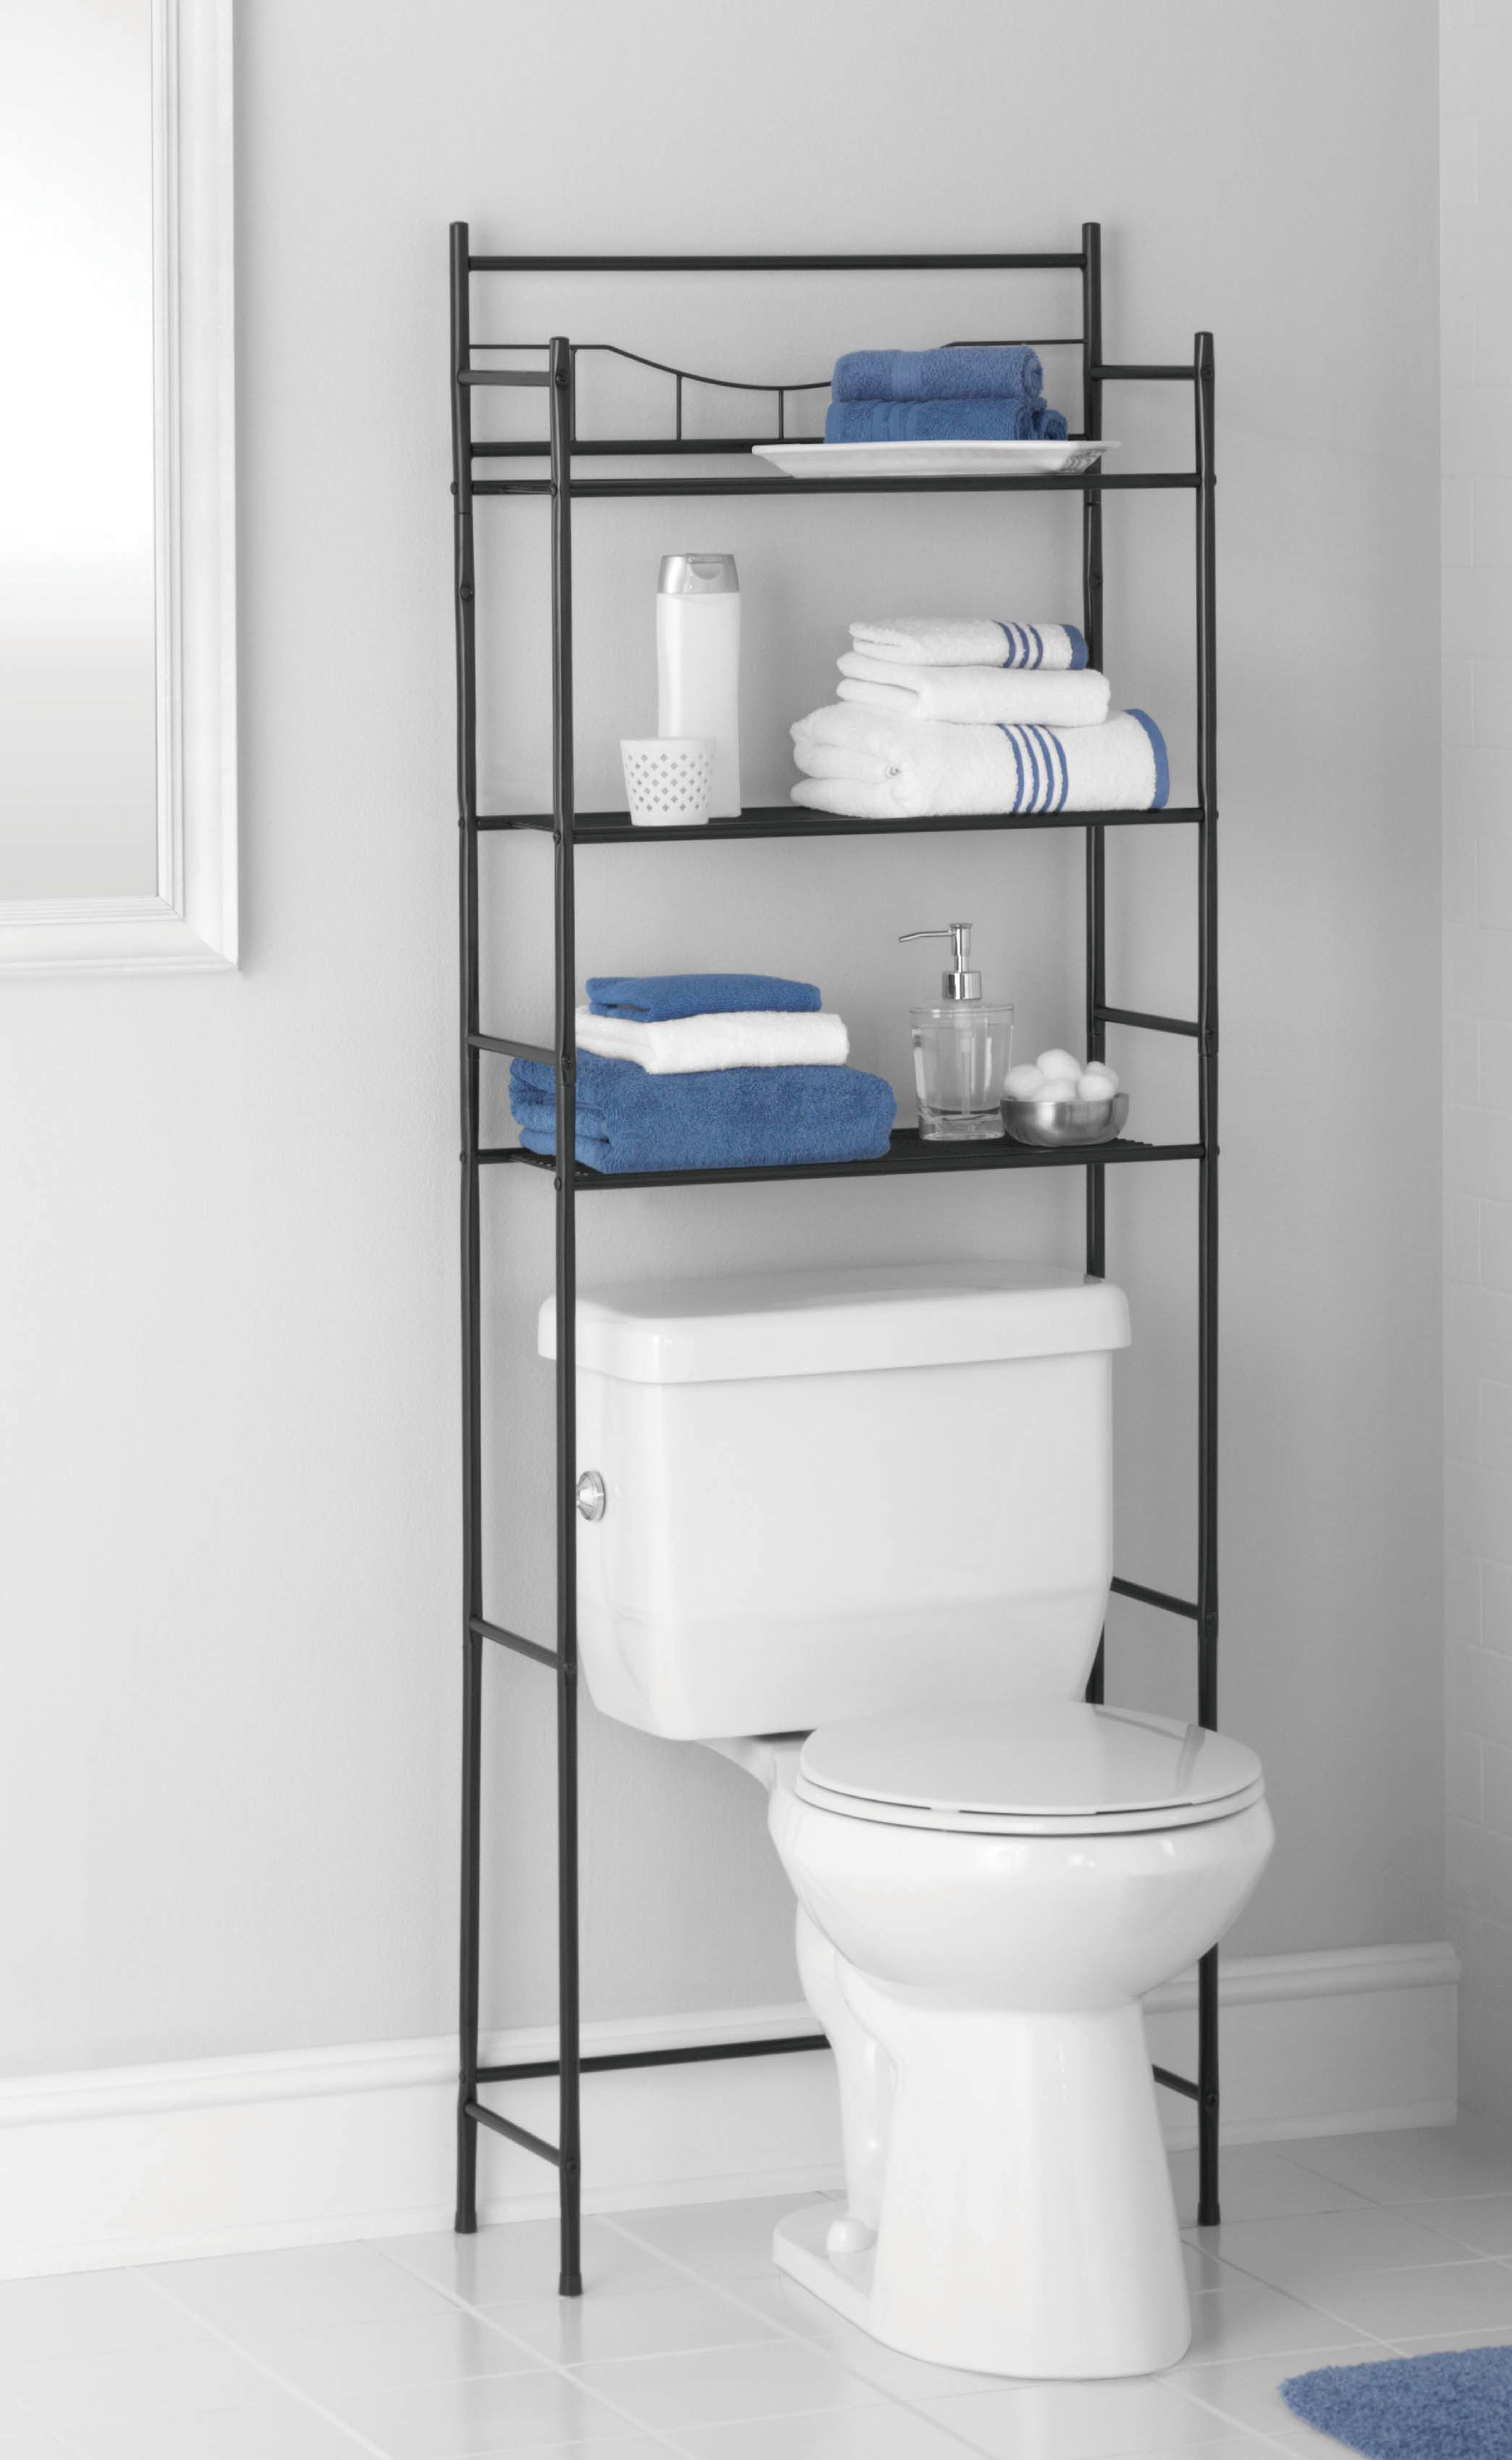 Mainstays 3-Shelf Bathroom over the Toilet Space Saver with Liner, Oil Rubbed Bronze for Adults - image 2 of 7